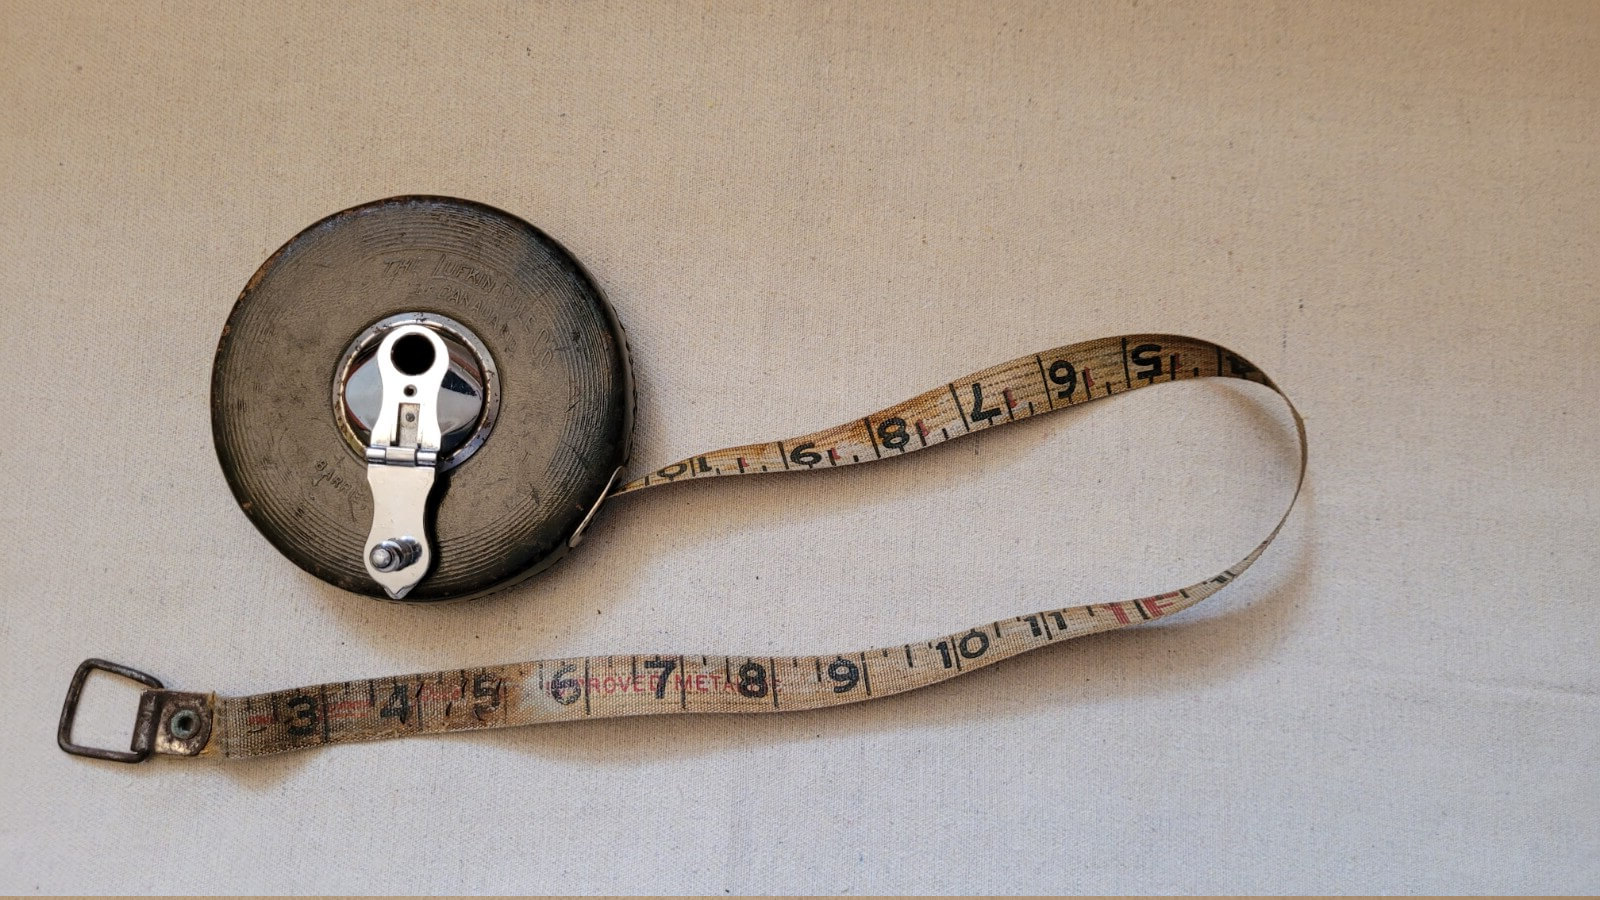 Vintage Lufkin Rule Co Canada tape measure with wind chrome hand crank and brown stitched leather, manufactured in Barrie, Ontario